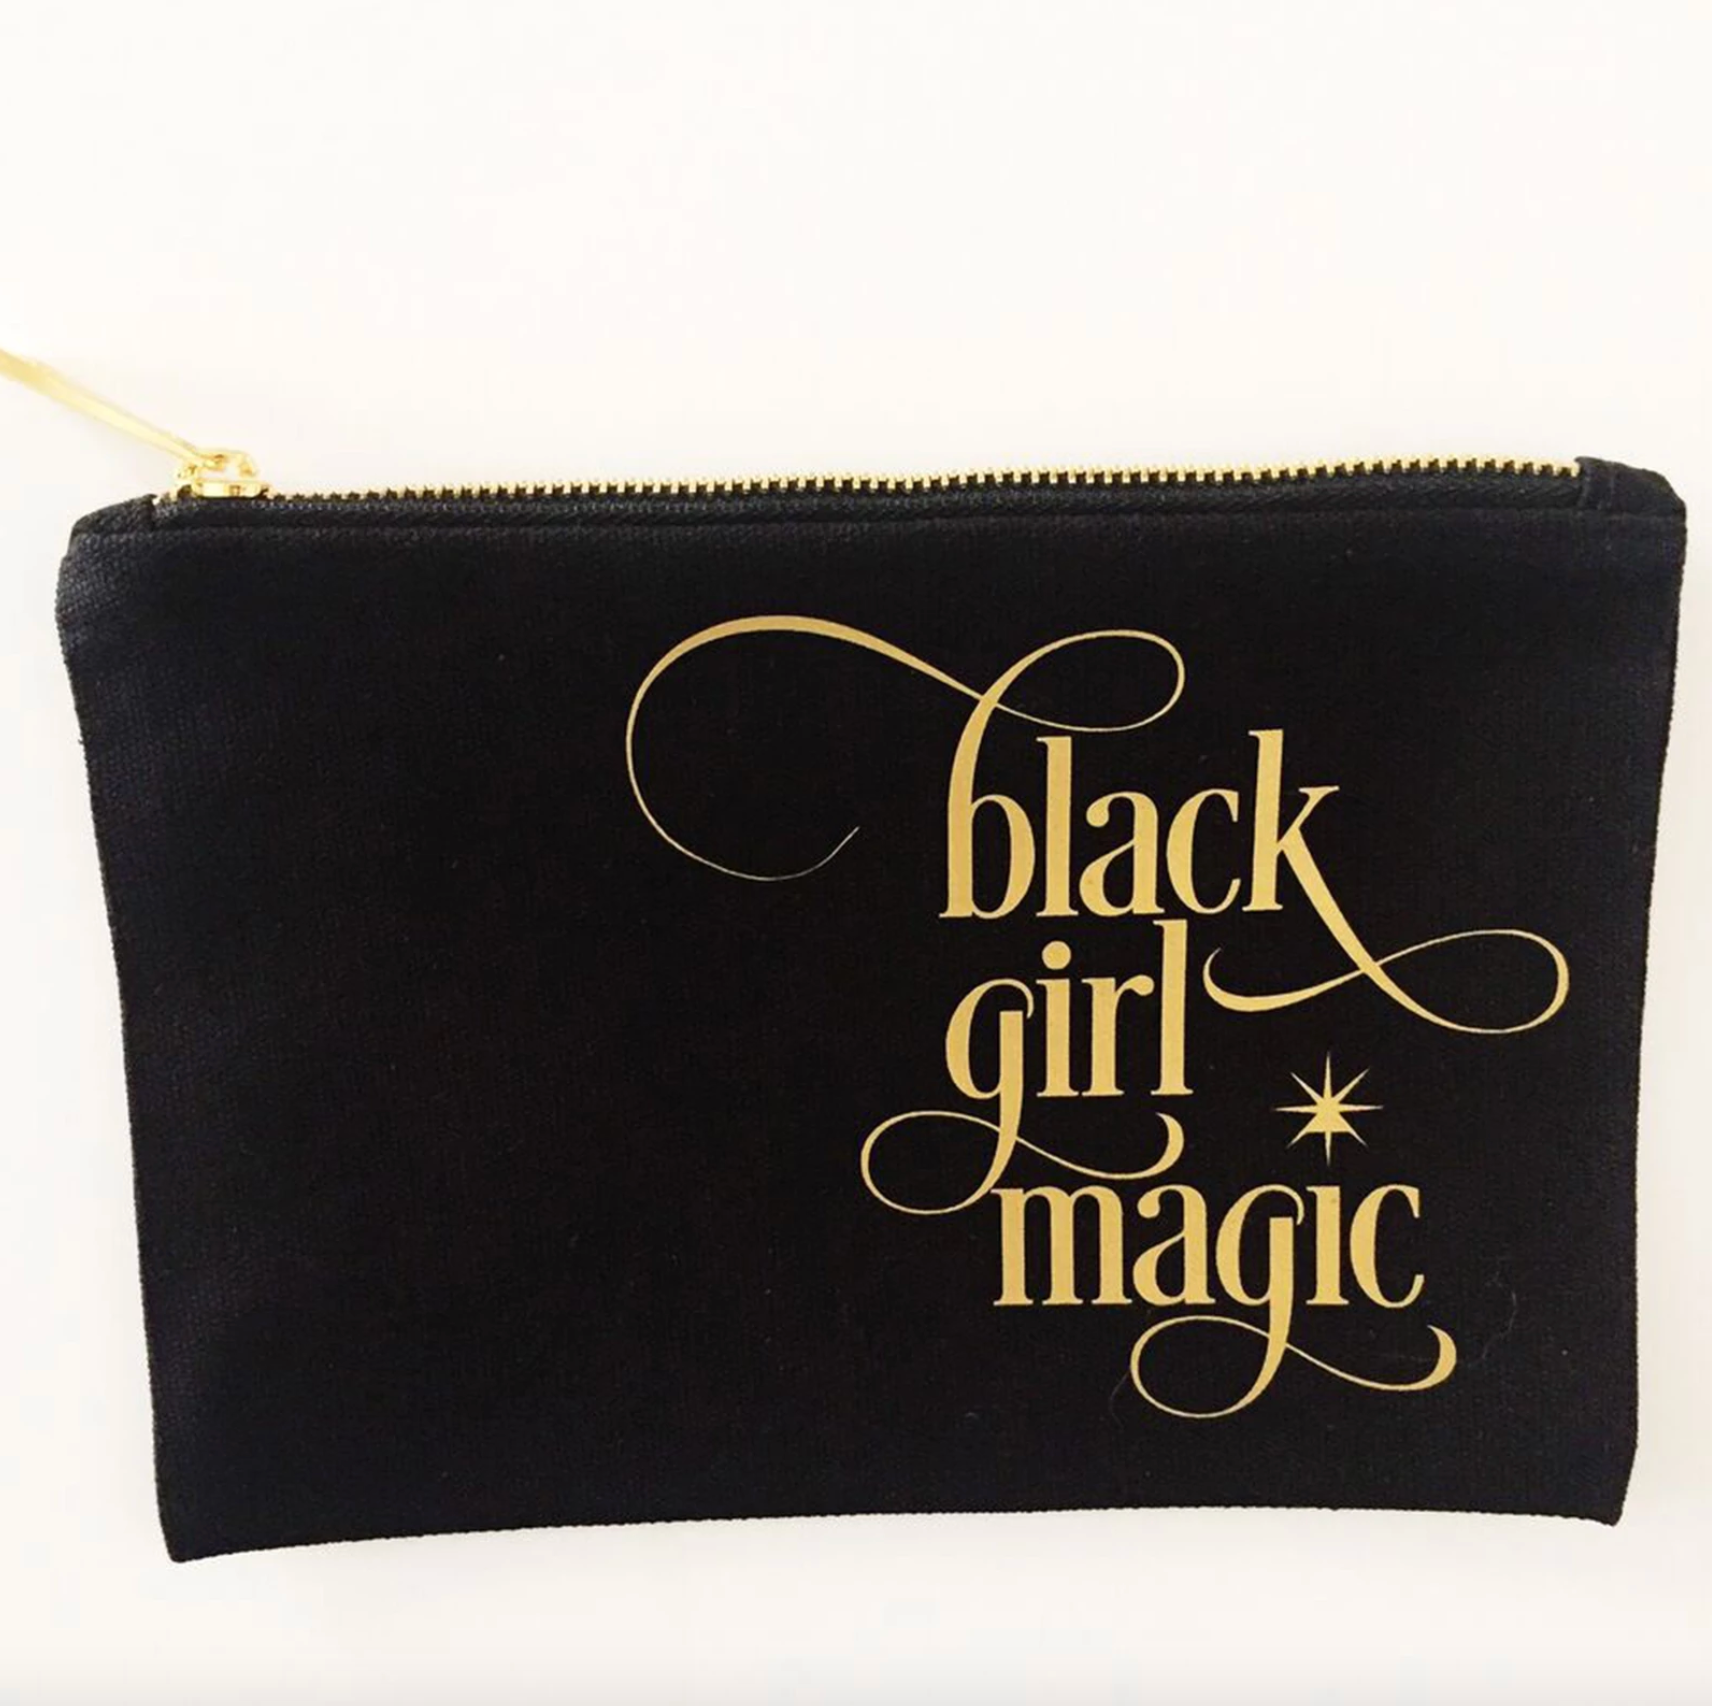 #BuyBlack Gift Guide: 16 Stocking Stuffers Under $25